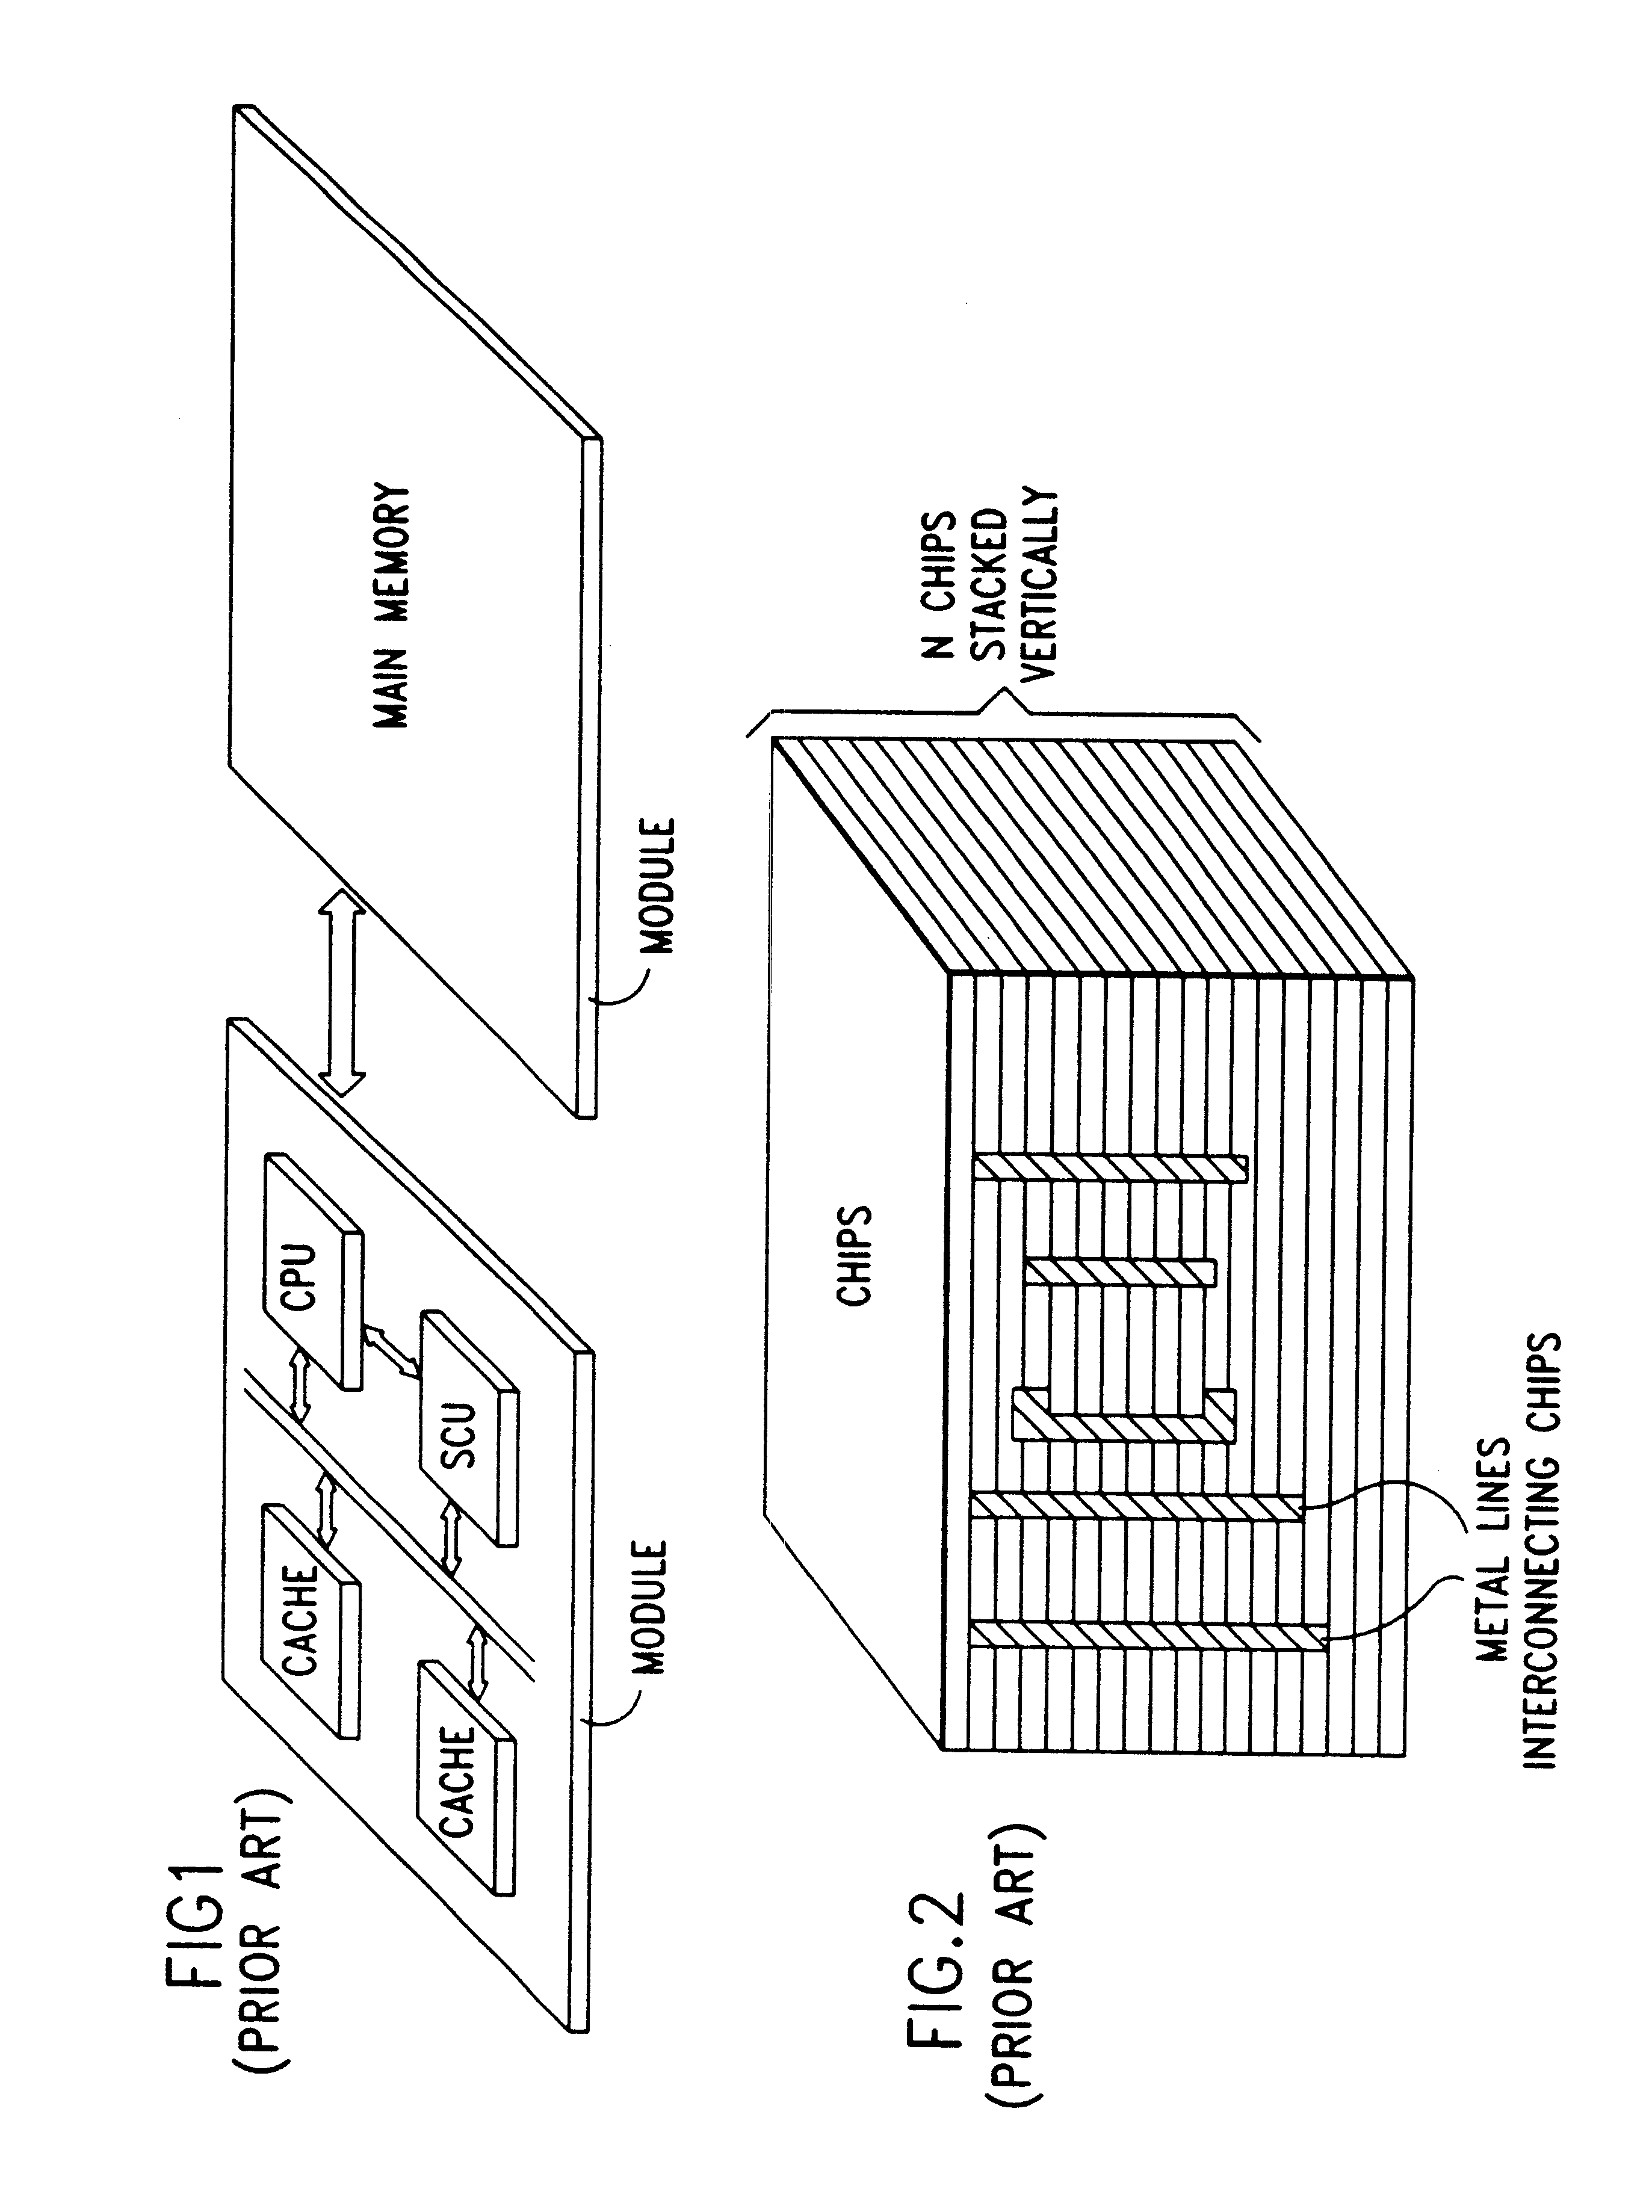 Three-dimensional packaging technology for multi-layered integrated circuits